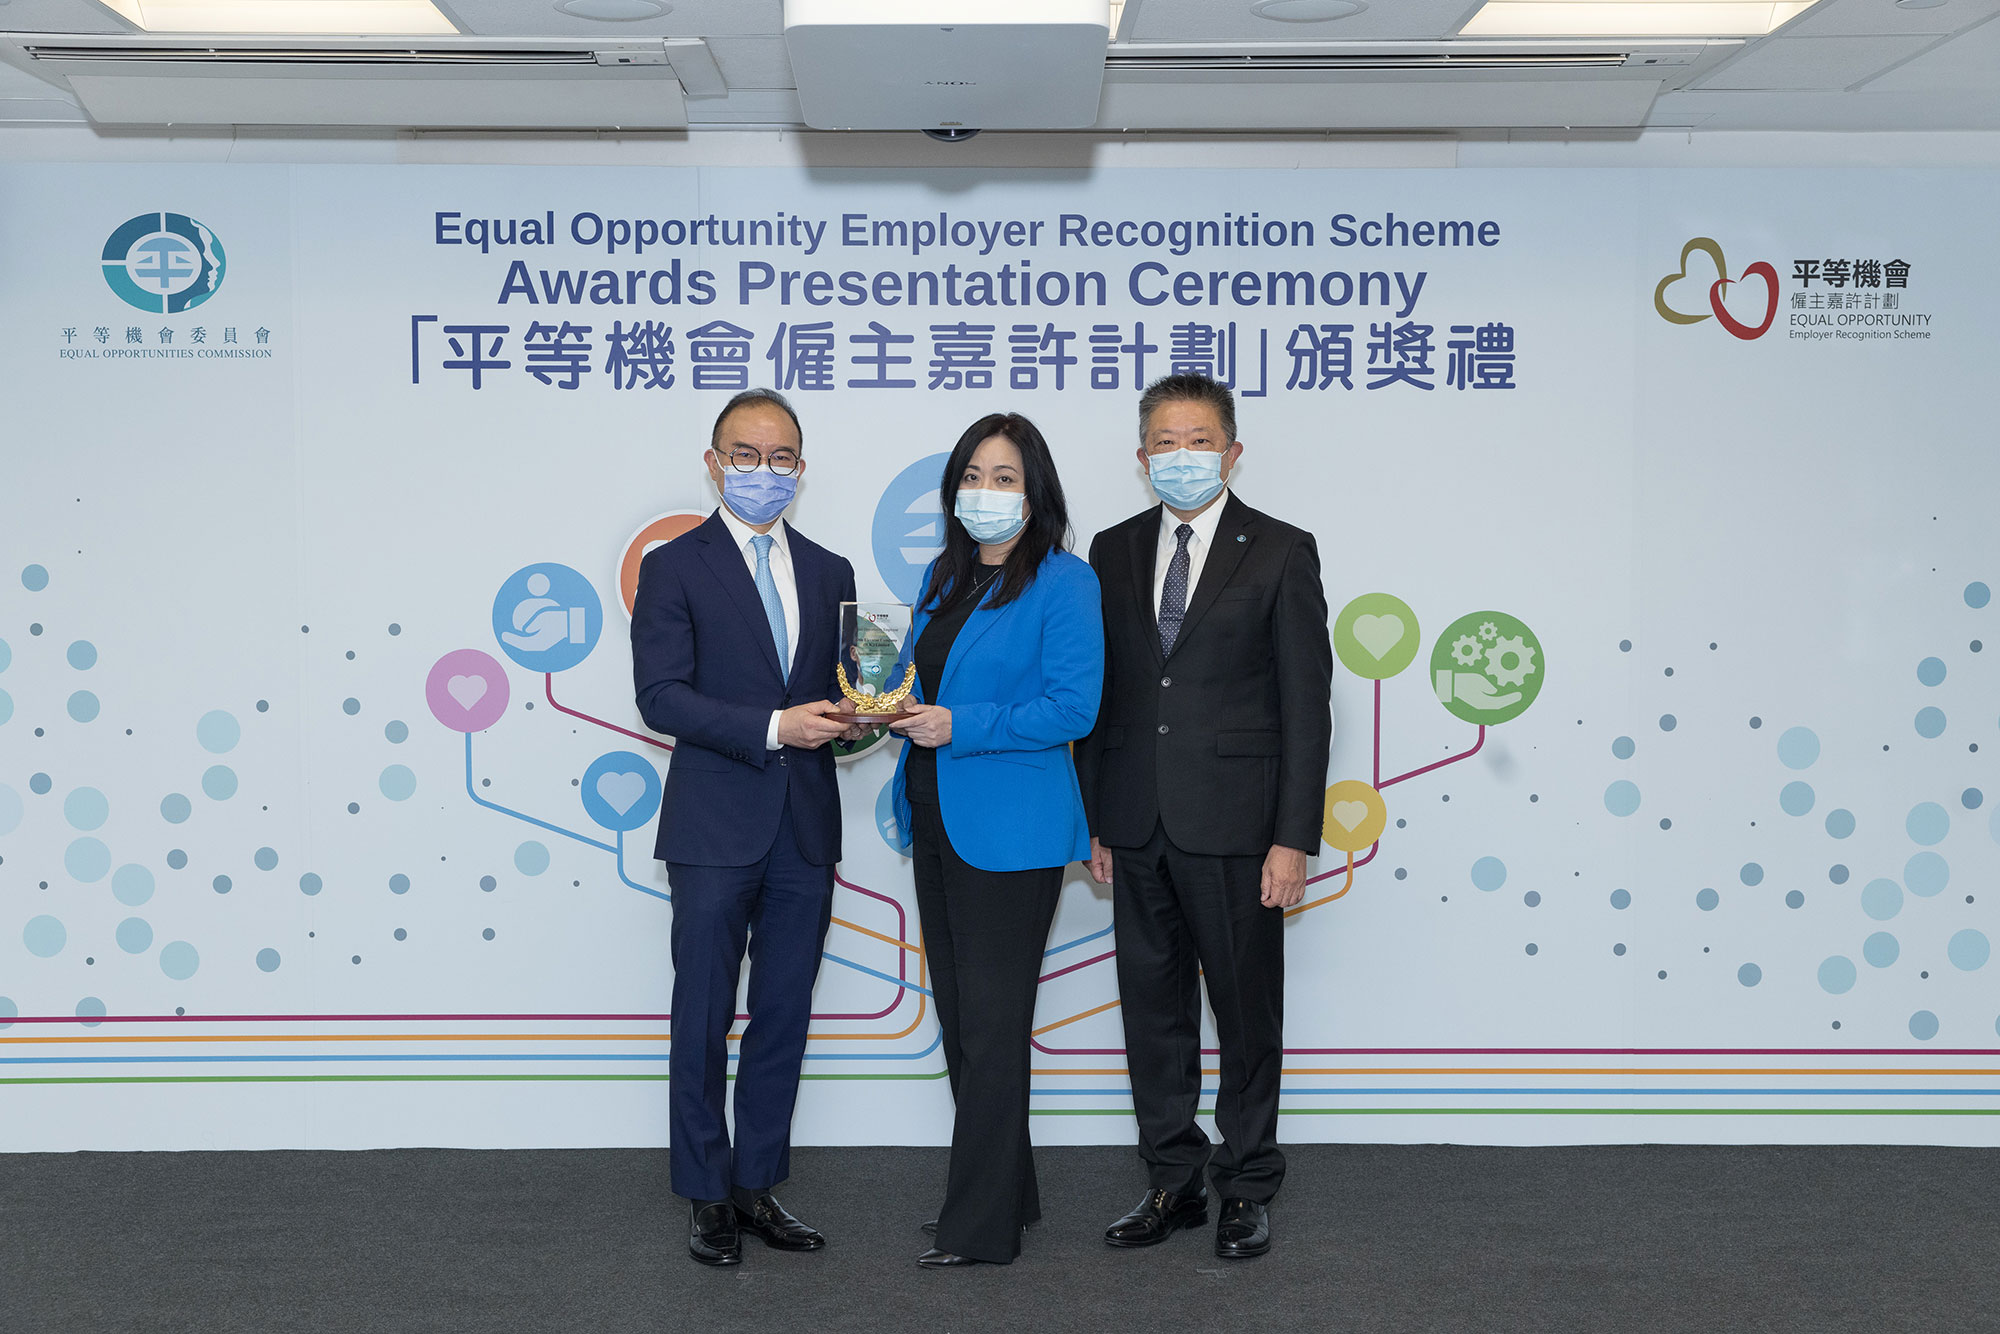 Mr Erick TSANG Kwok-wai, IDSM, JP, Secretary for Constitutional and Mainland Affairs (left) and Mr Ricky CHU Man-kin, IDS, Chairperson of the Equal Opportunities Commission (right), present the trophy to the representative of Otis Elevator Company (H.K.) Limited (centre), winner of the Gold Award of the Equal Opportunity Employer Recognition Scheme.